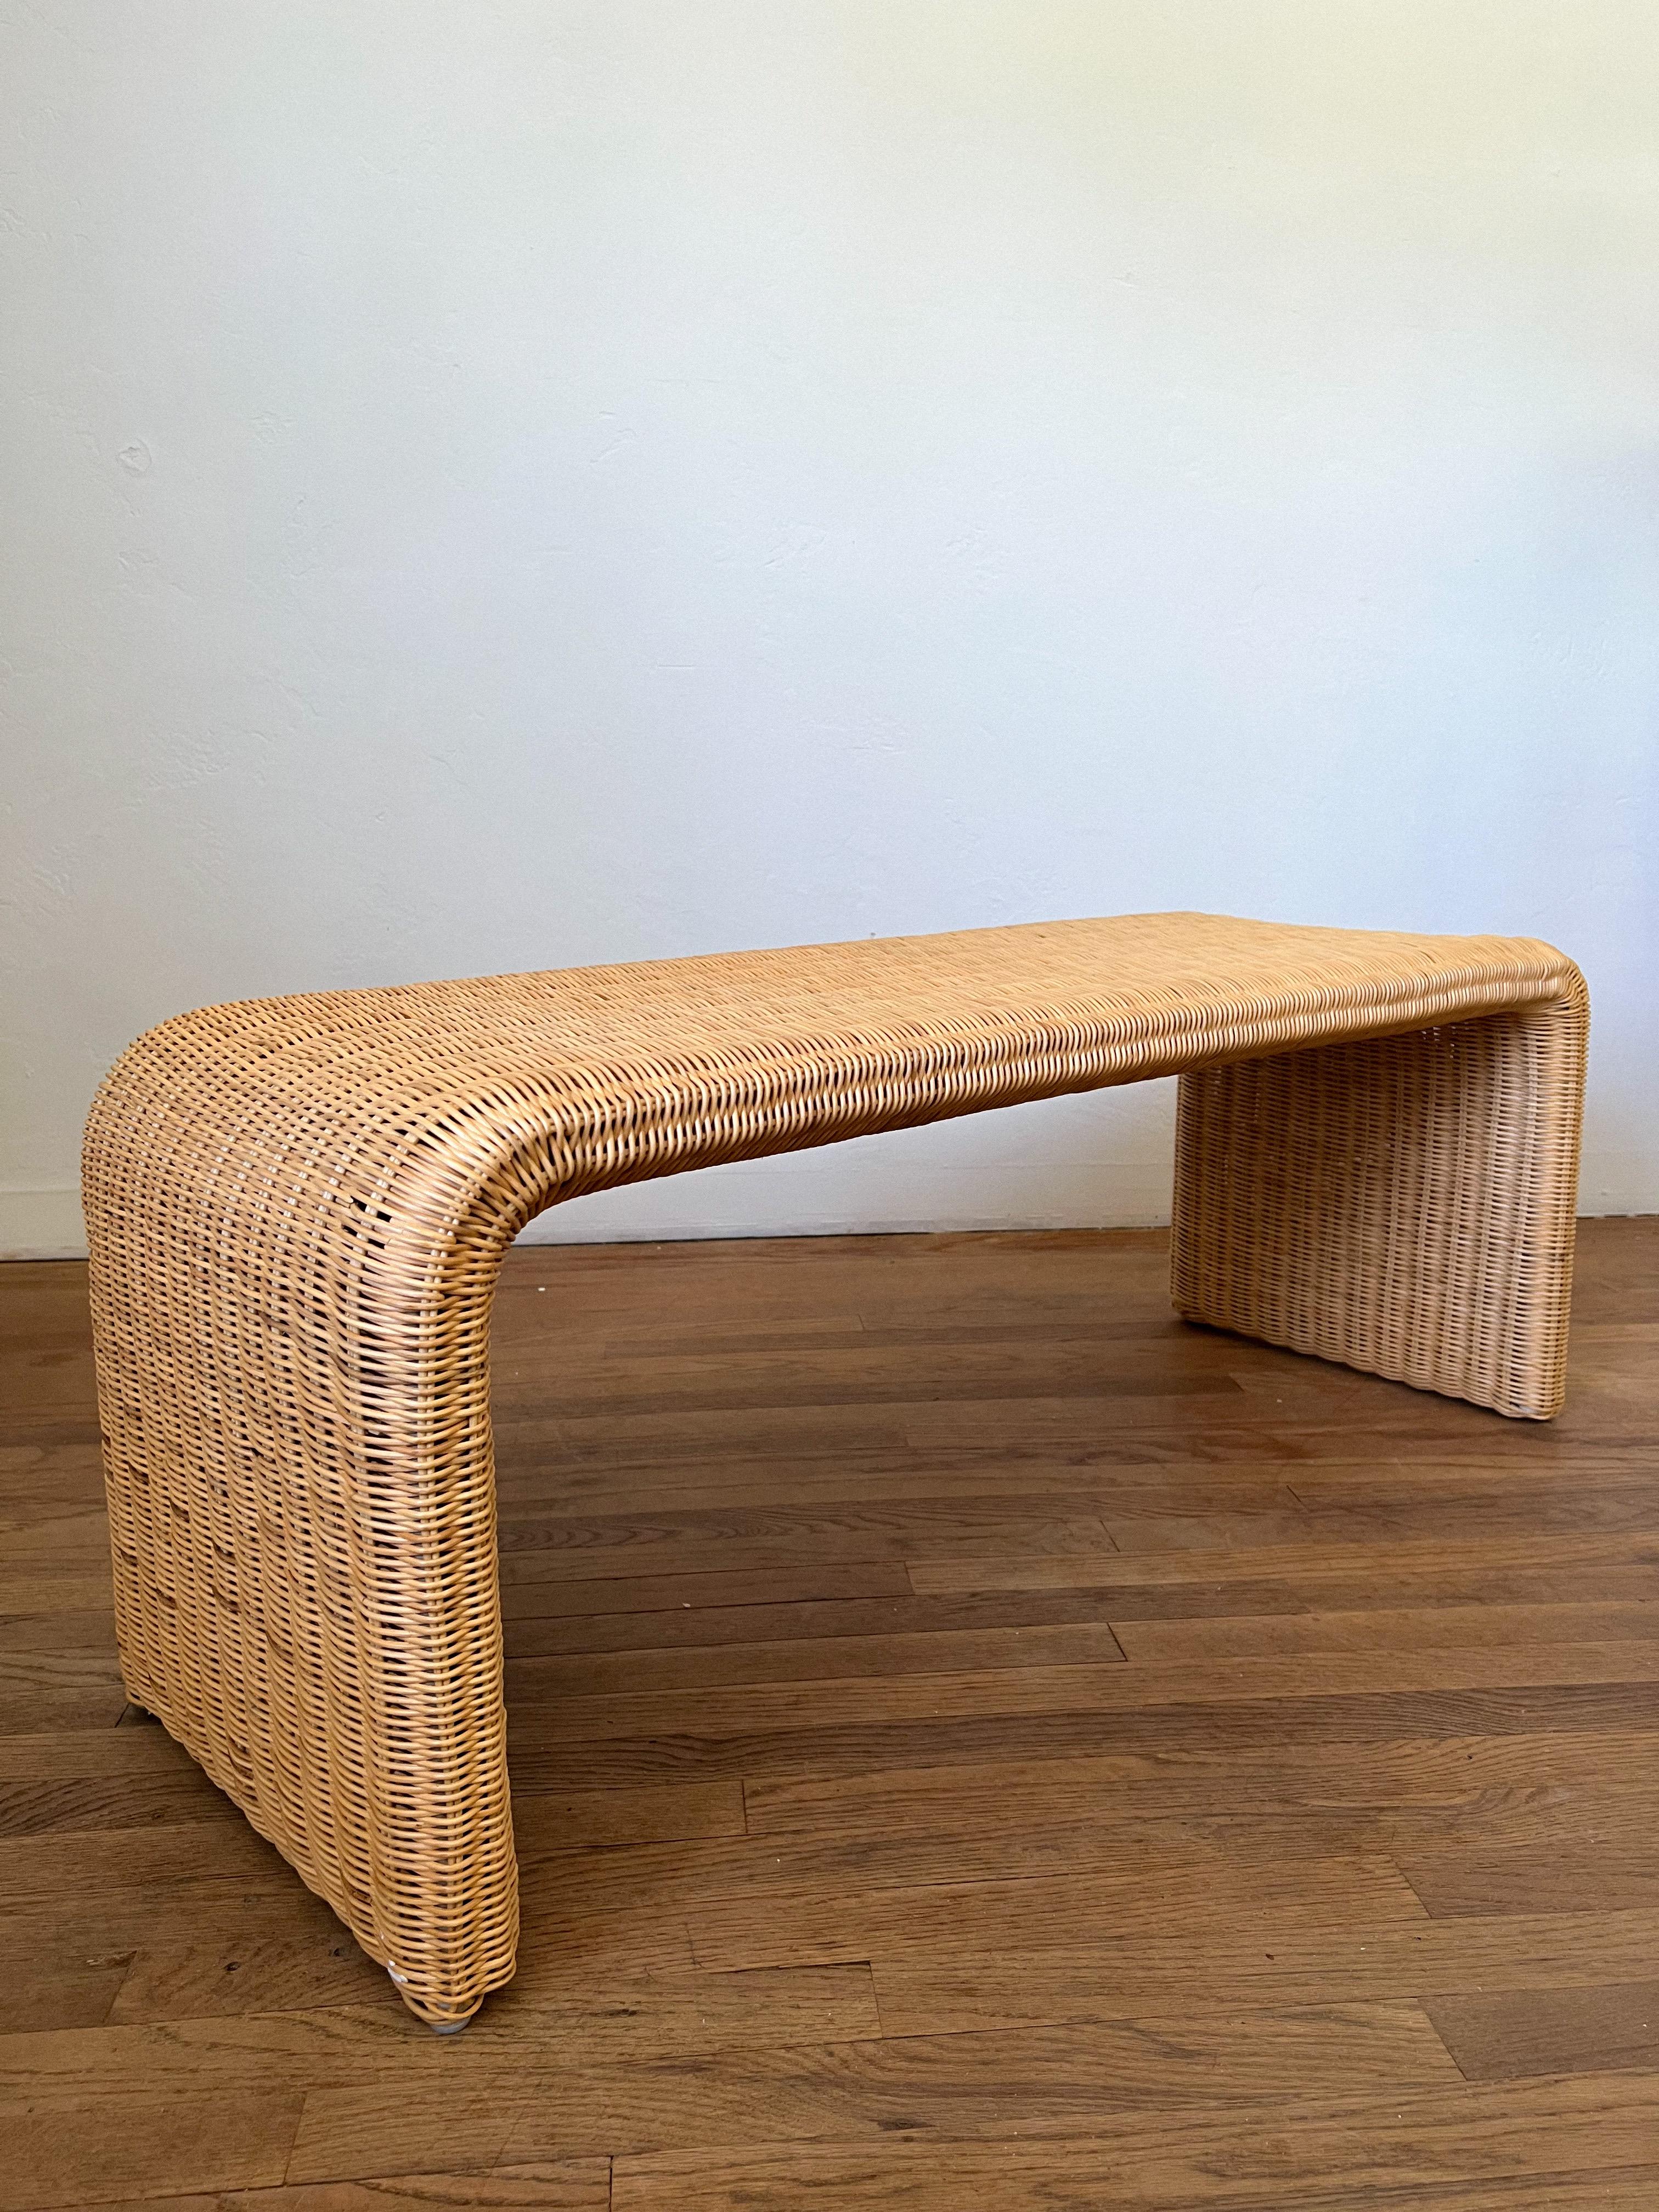 1970s Wicker Waterfall Bench In Good Condition For Sale In La Mesa, CA